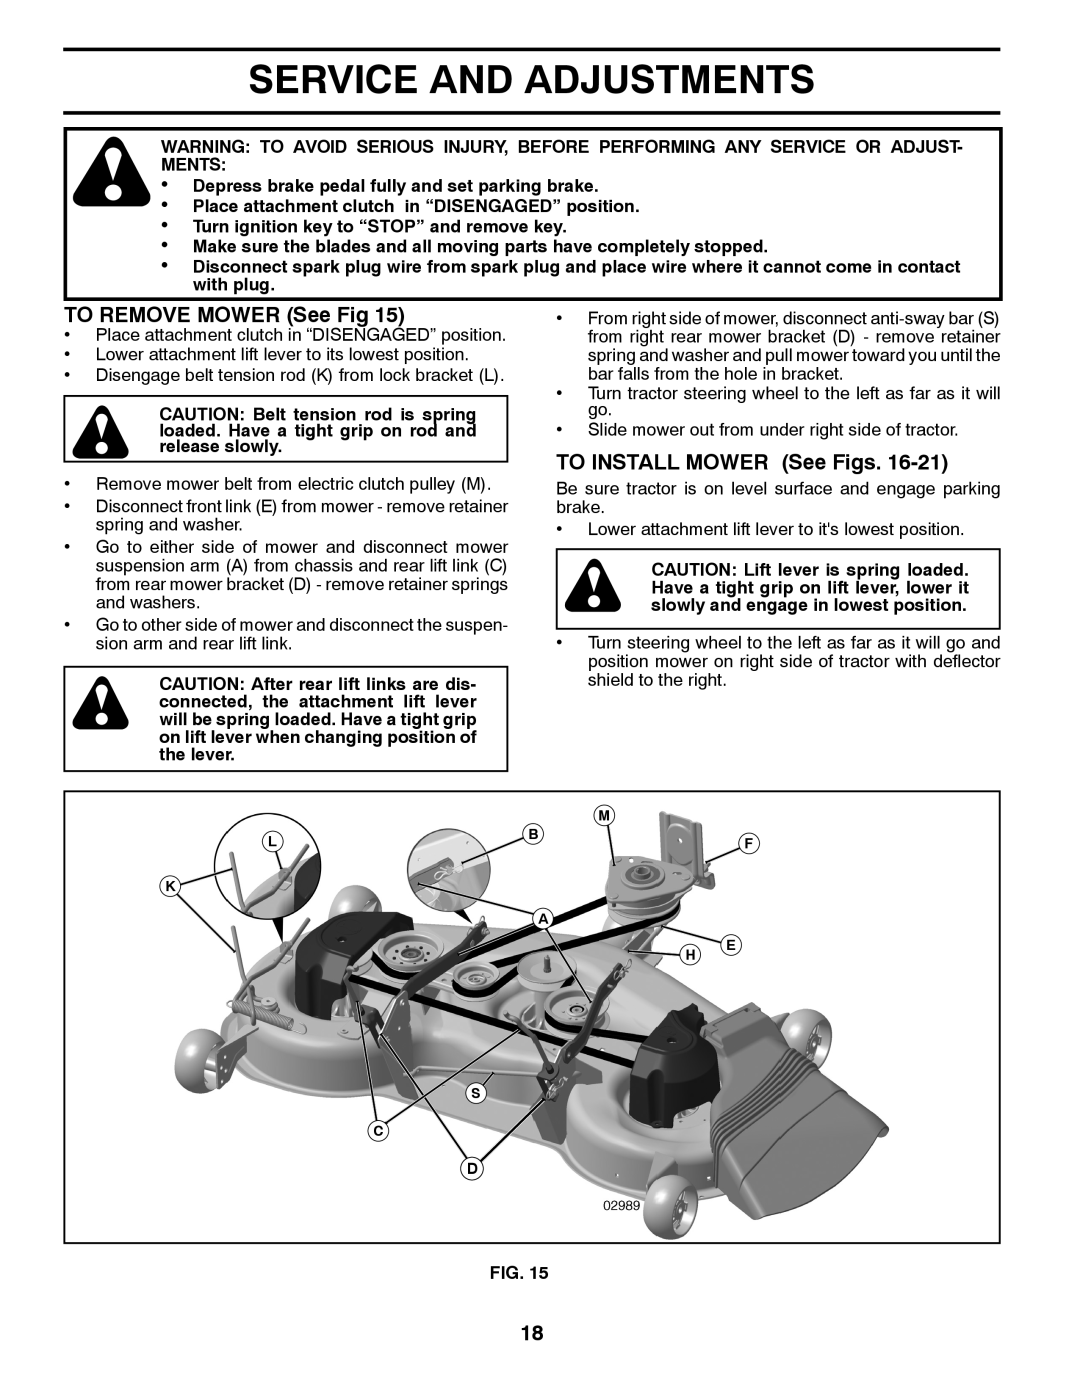 Univex 96043004400, 2348LS owner manual Service And Adjustments, TO REMOVE MOWER See Fig, TO INSTALL MOWER See Figs 